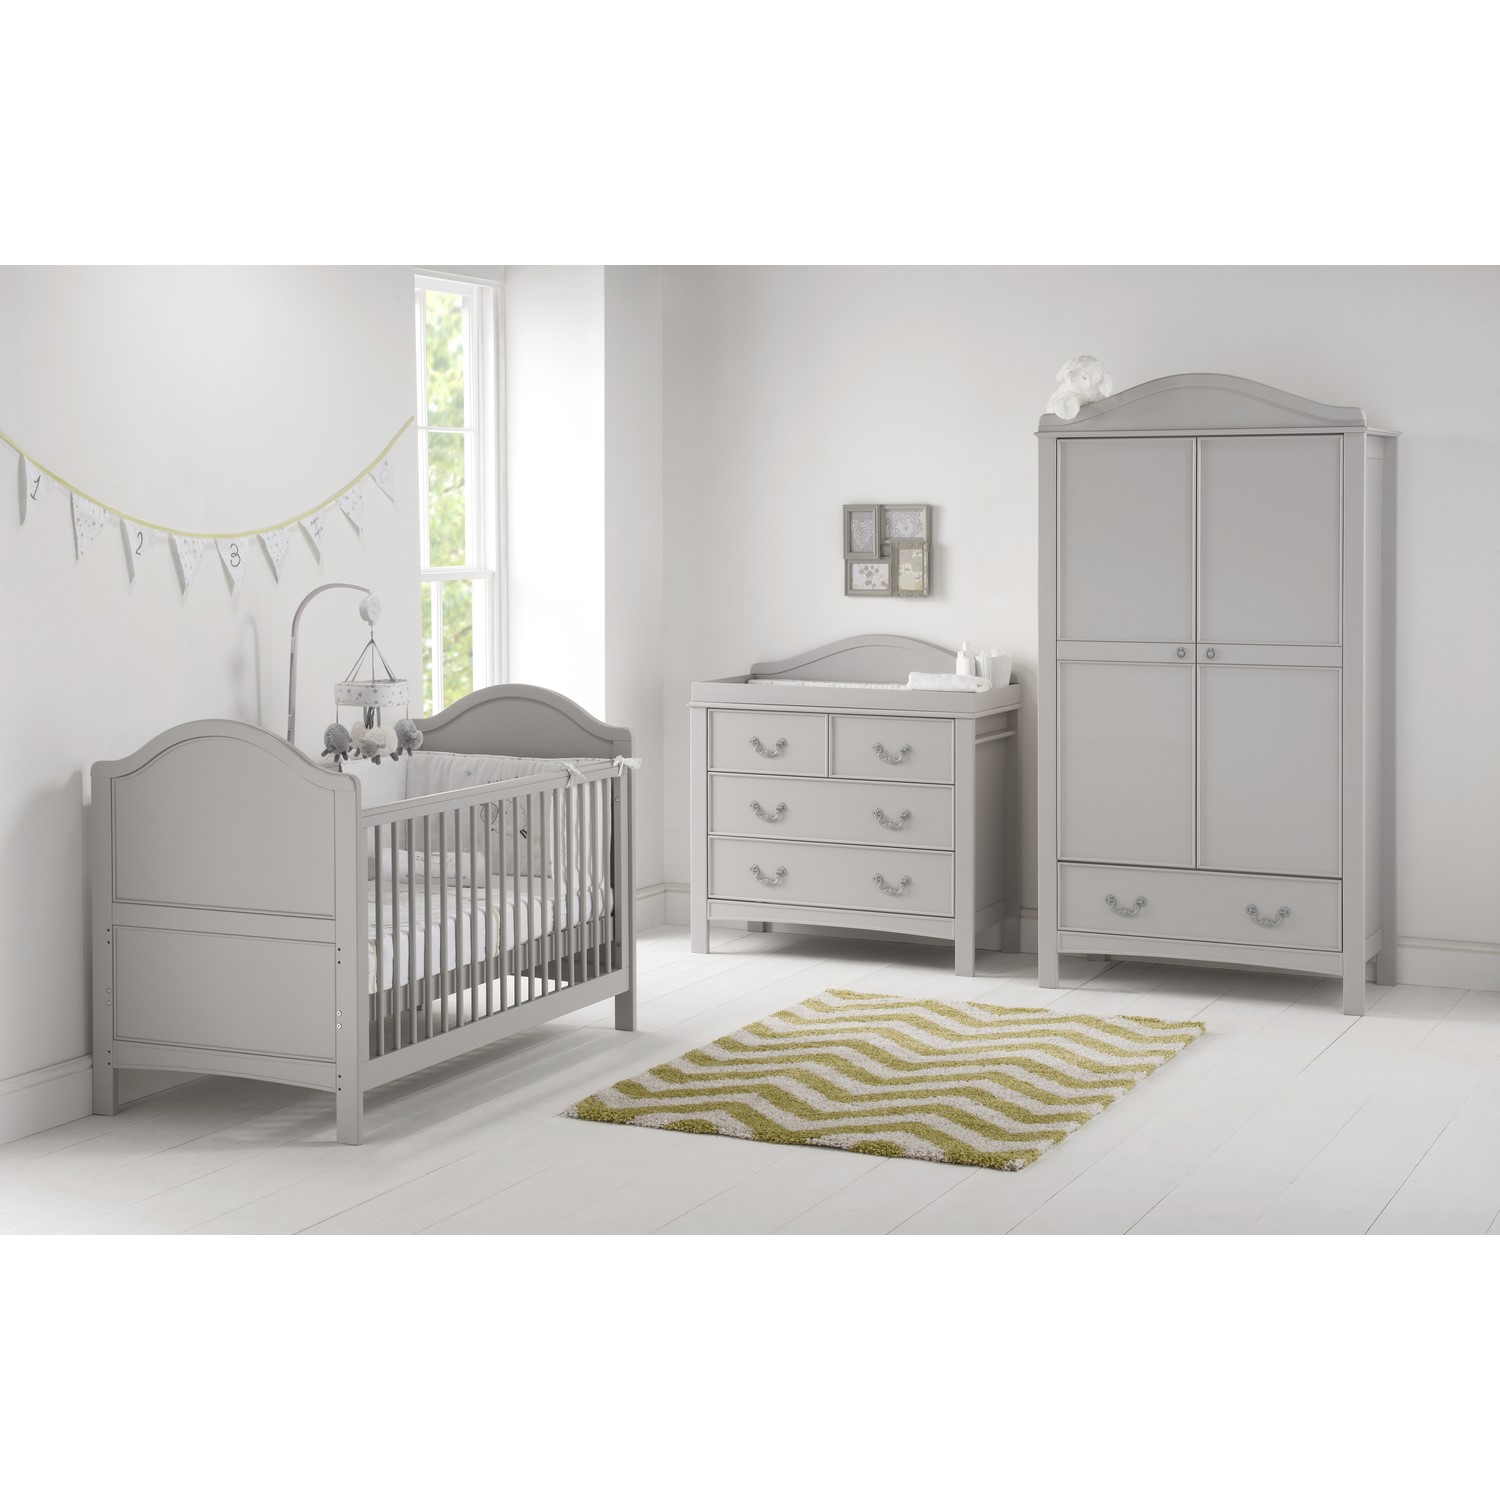 Photo of 3 piece nursery furniture set in grey - east coast toulouse